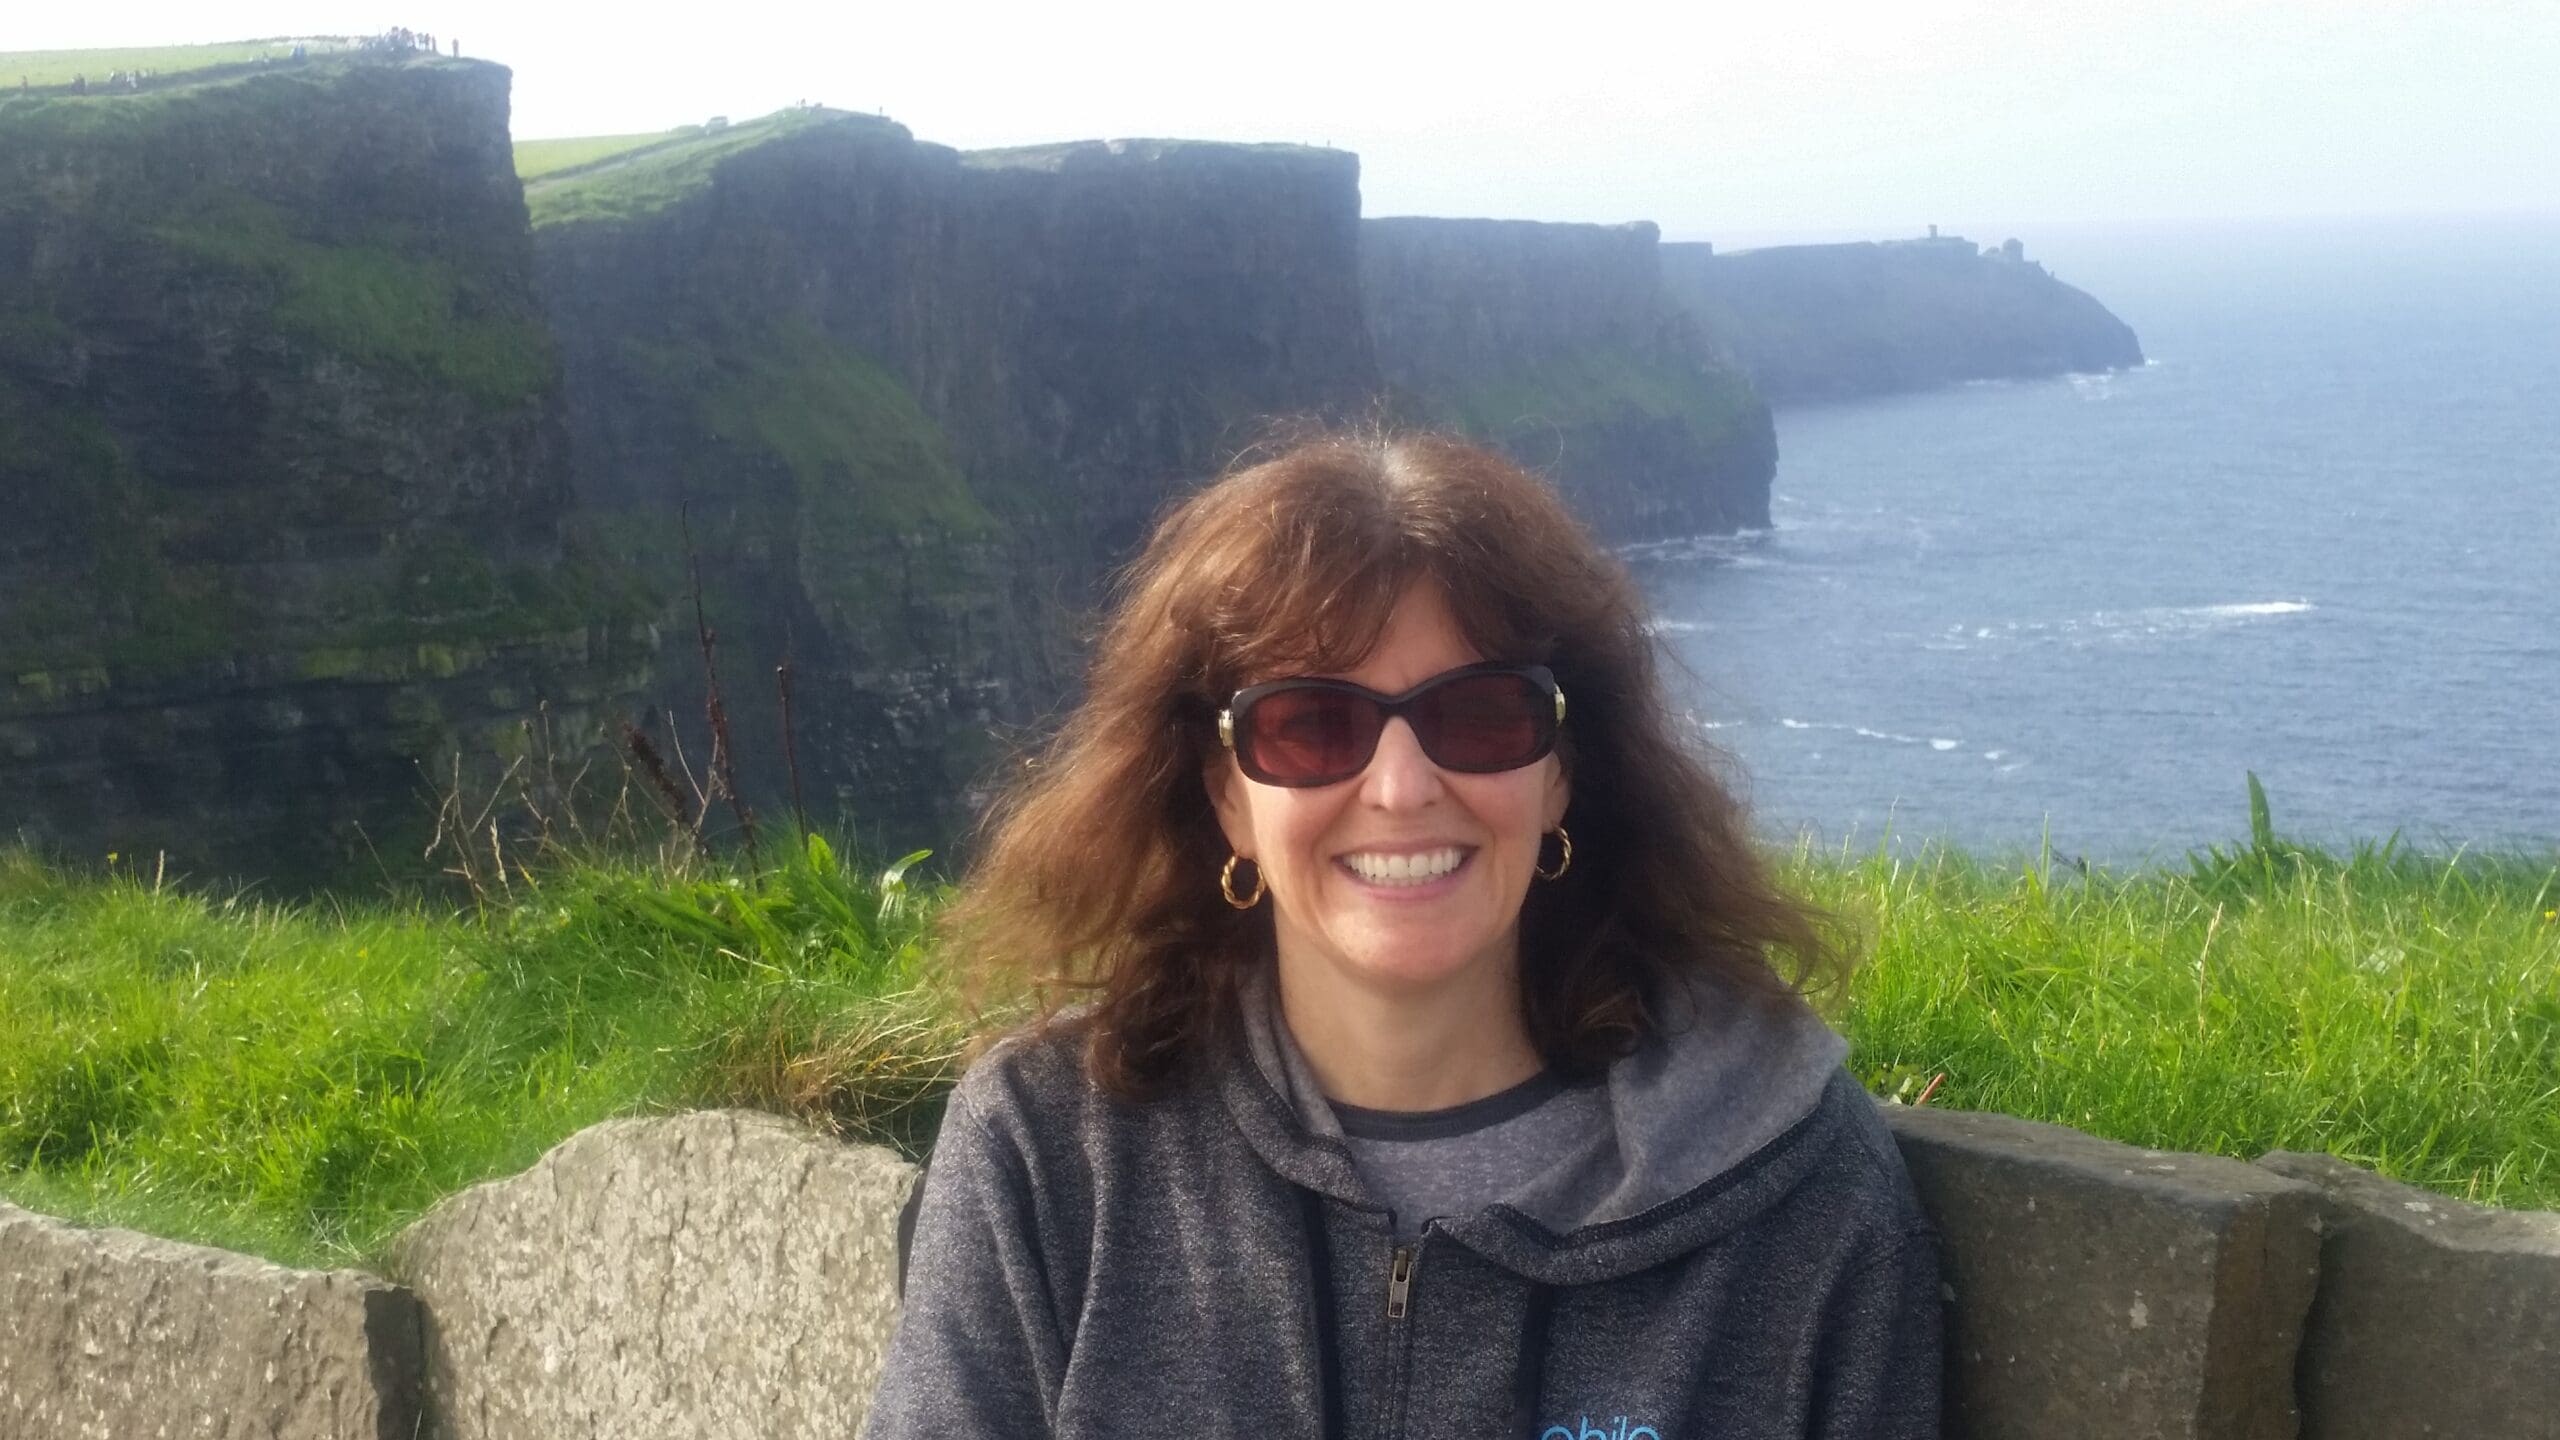 Emily at Cliffs of Moher 9-16-18